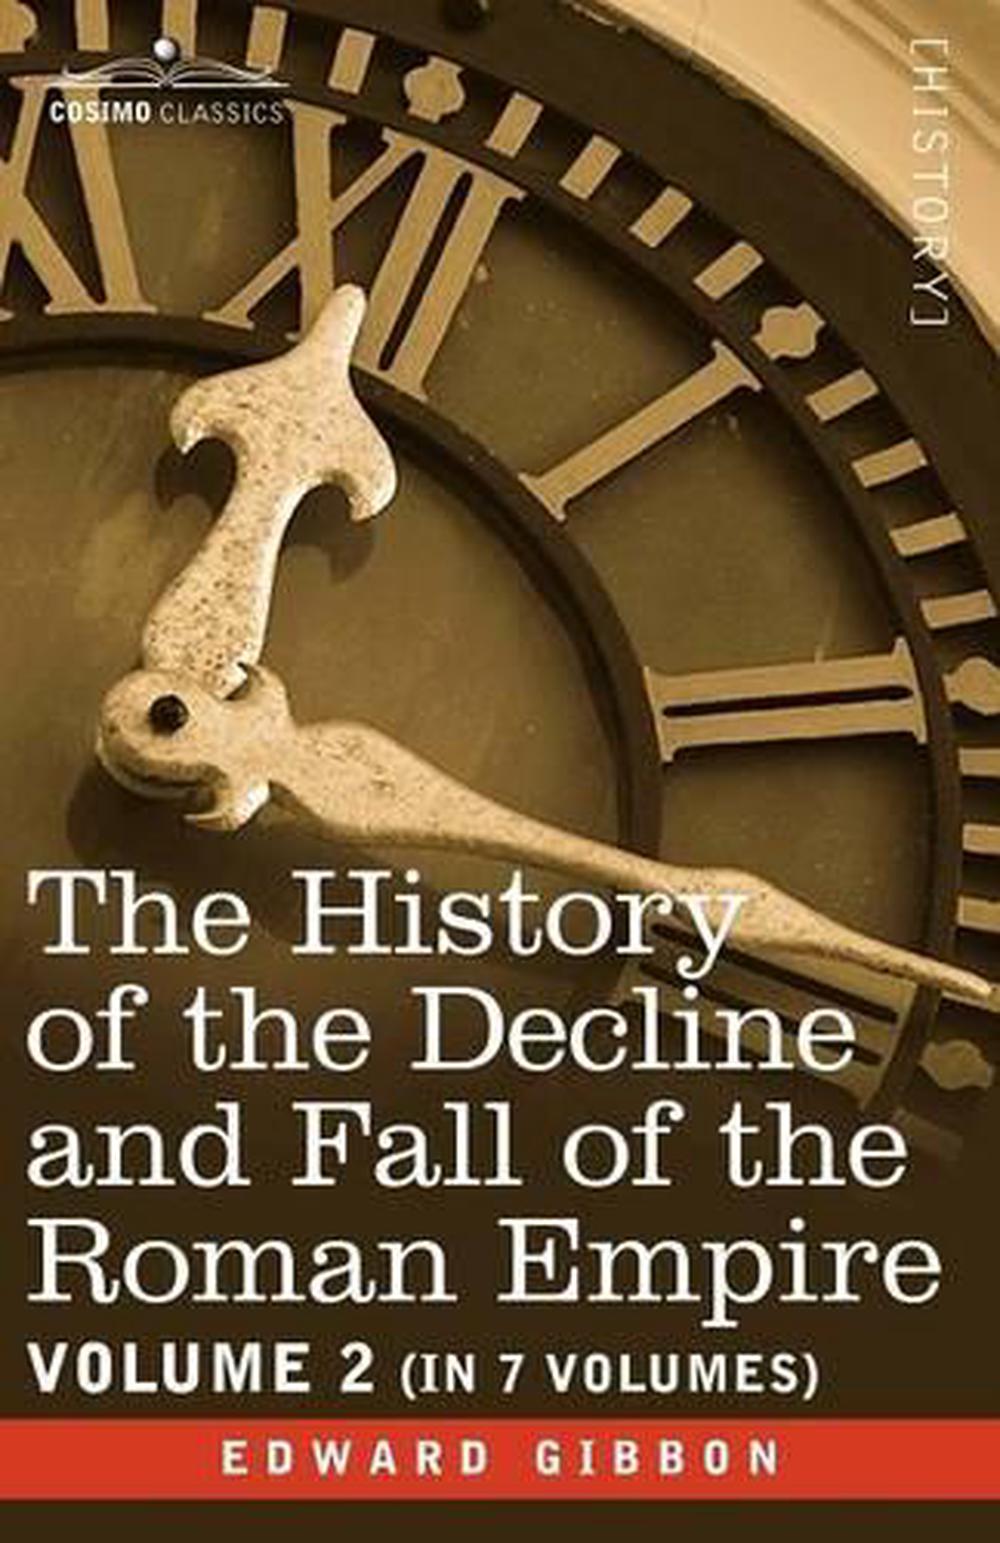 The History of the Decline and Fall of the Roman Empire Volum... by Edward Gibbon